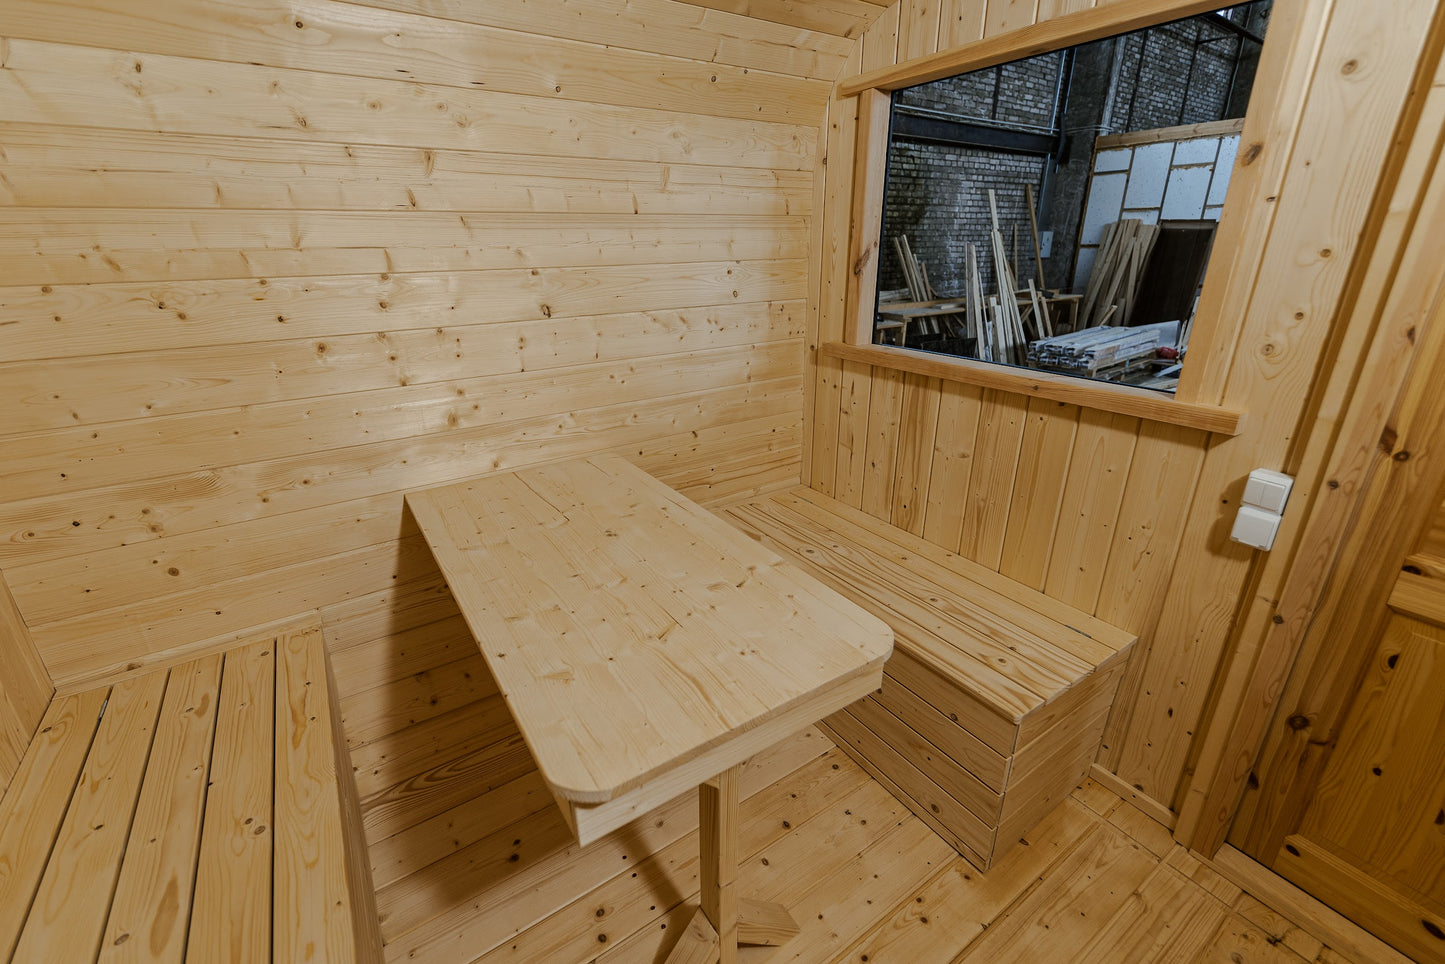 Oval Sauna with Steam Room and Dressing Room (2.4m*5.0m)